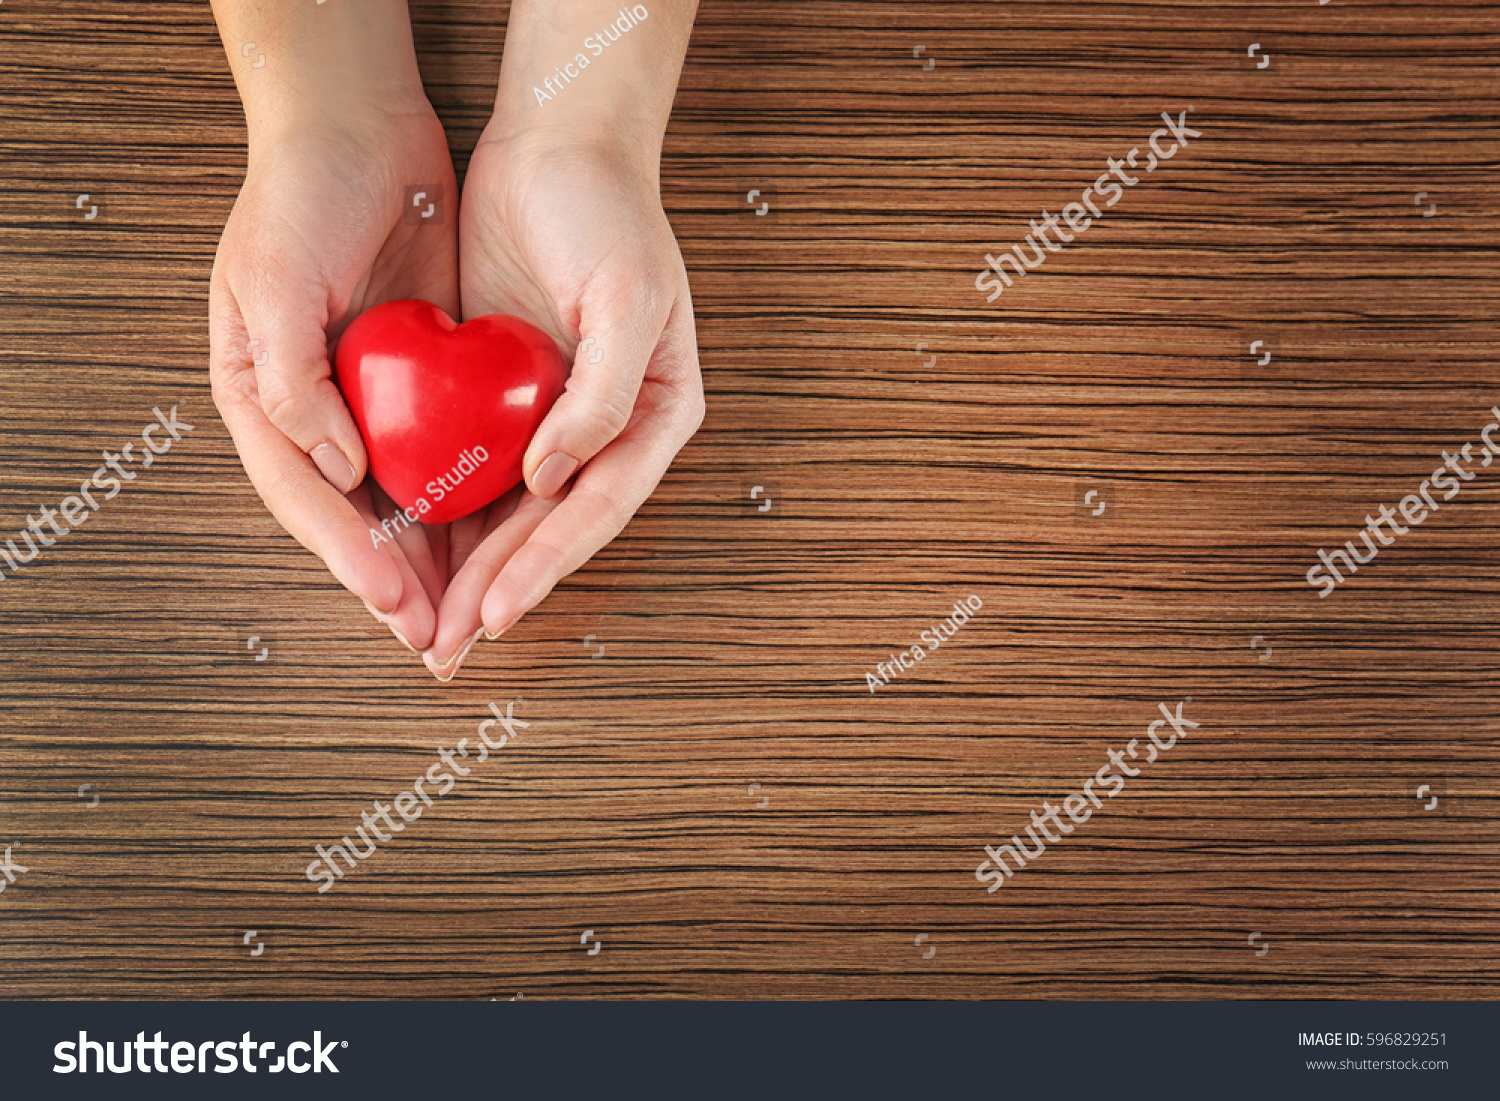 Female hands holding red heart on wooden background #596829251